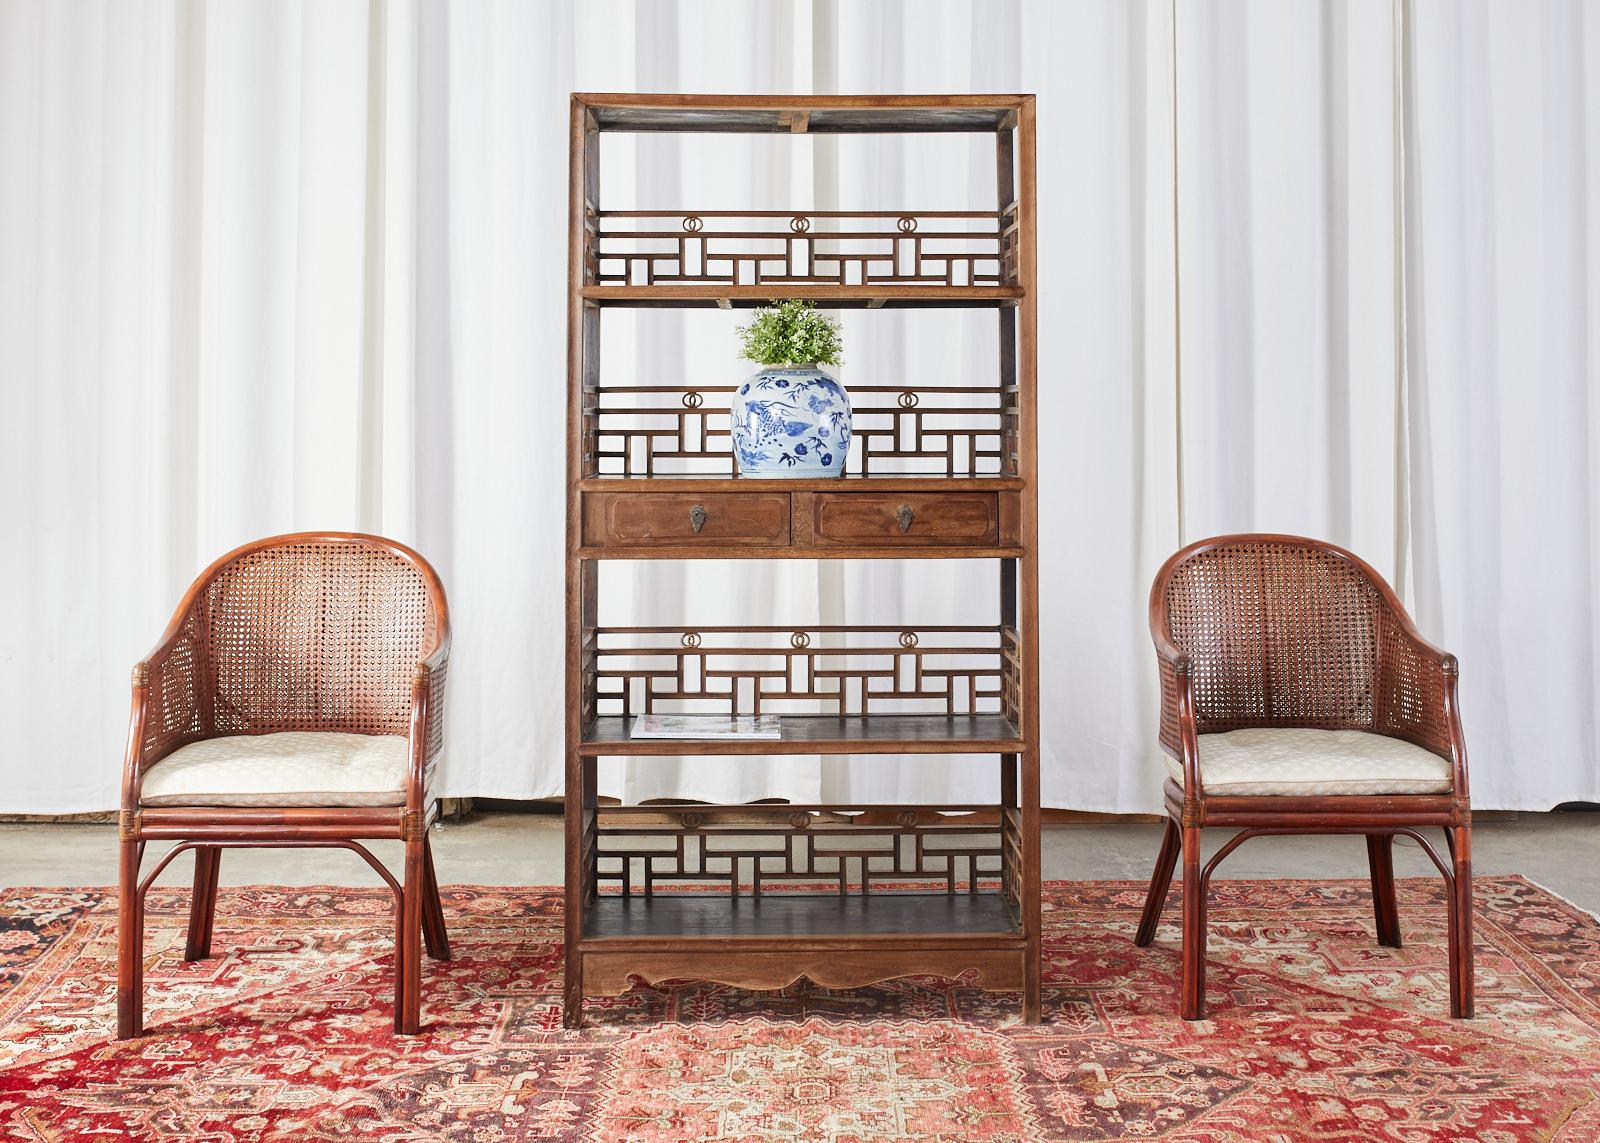 Qing dynasty style Chinese export bookcase or scholar's display shelf étagère constructed from elm. The four shelf bookcase features an open fretwork lattice design on the back and sides of each shelf. The middle shelf has two storage drawers with